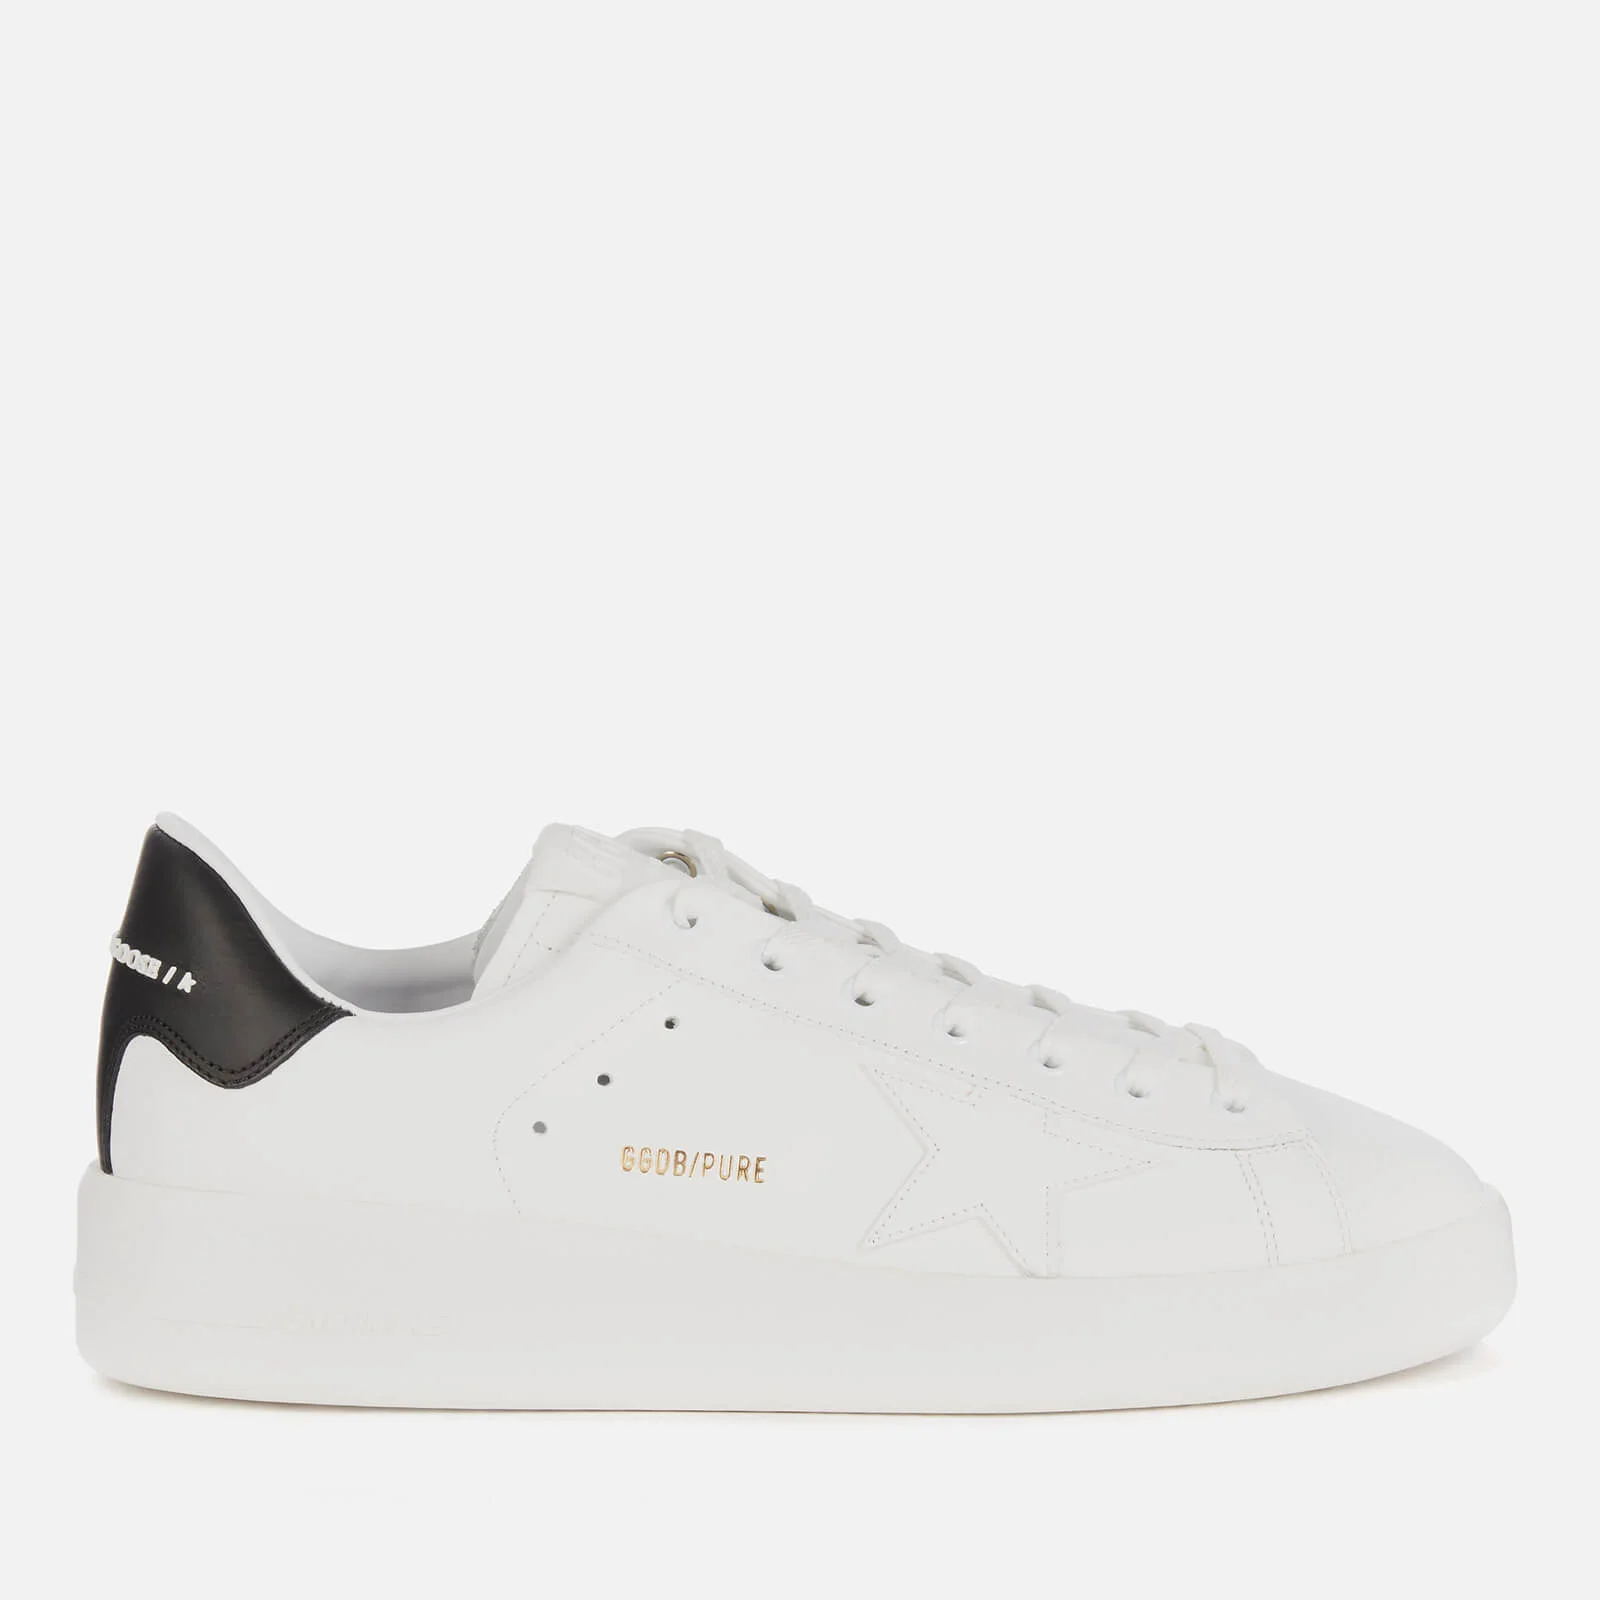 Golden Goose Men's Pure Star Leather Trainers - White/Black Image 1